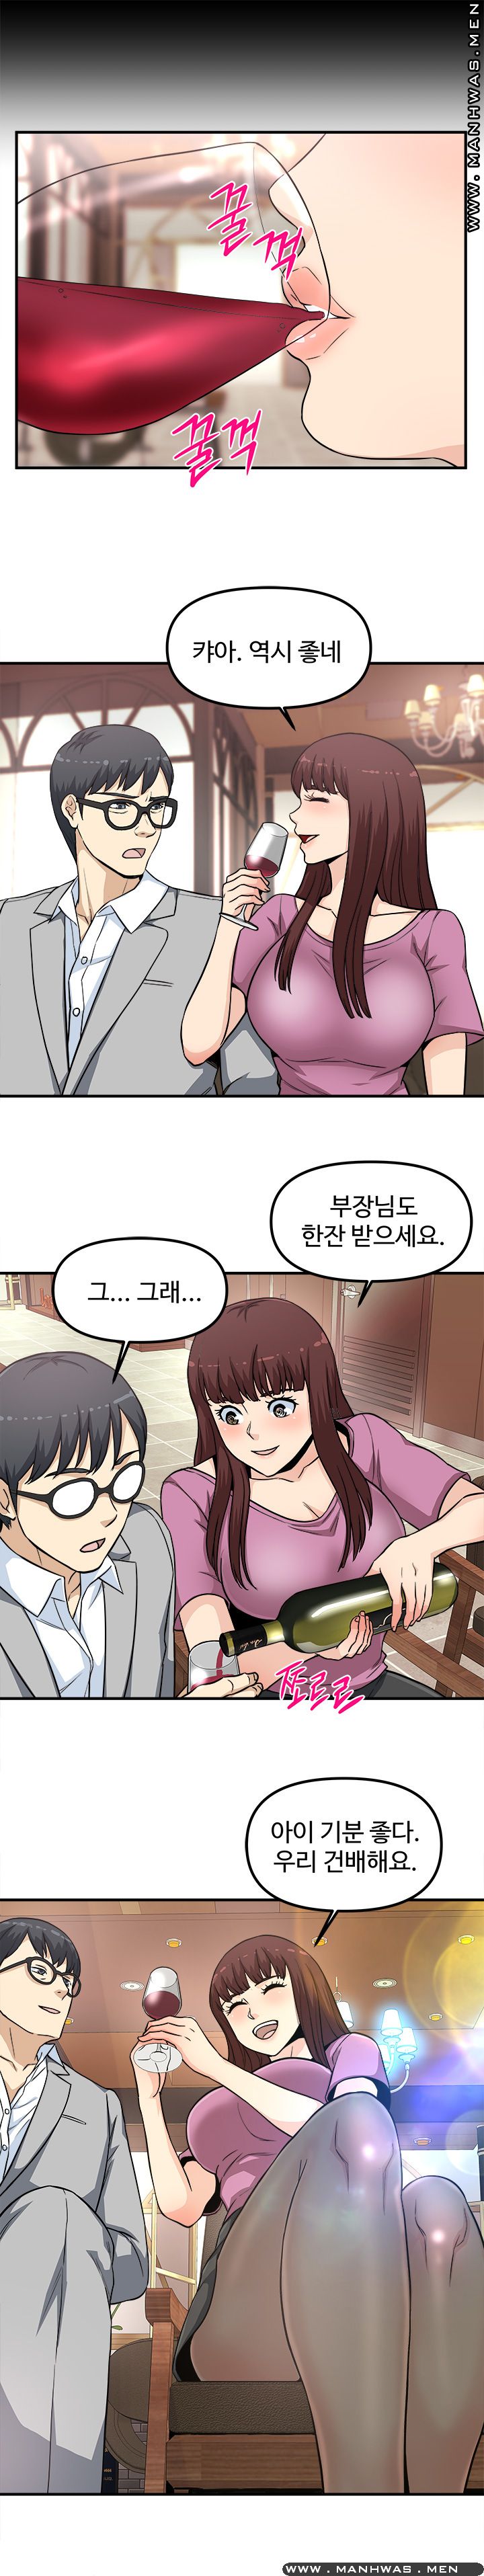 Office Bible Raw - Chapter 11 Page 8